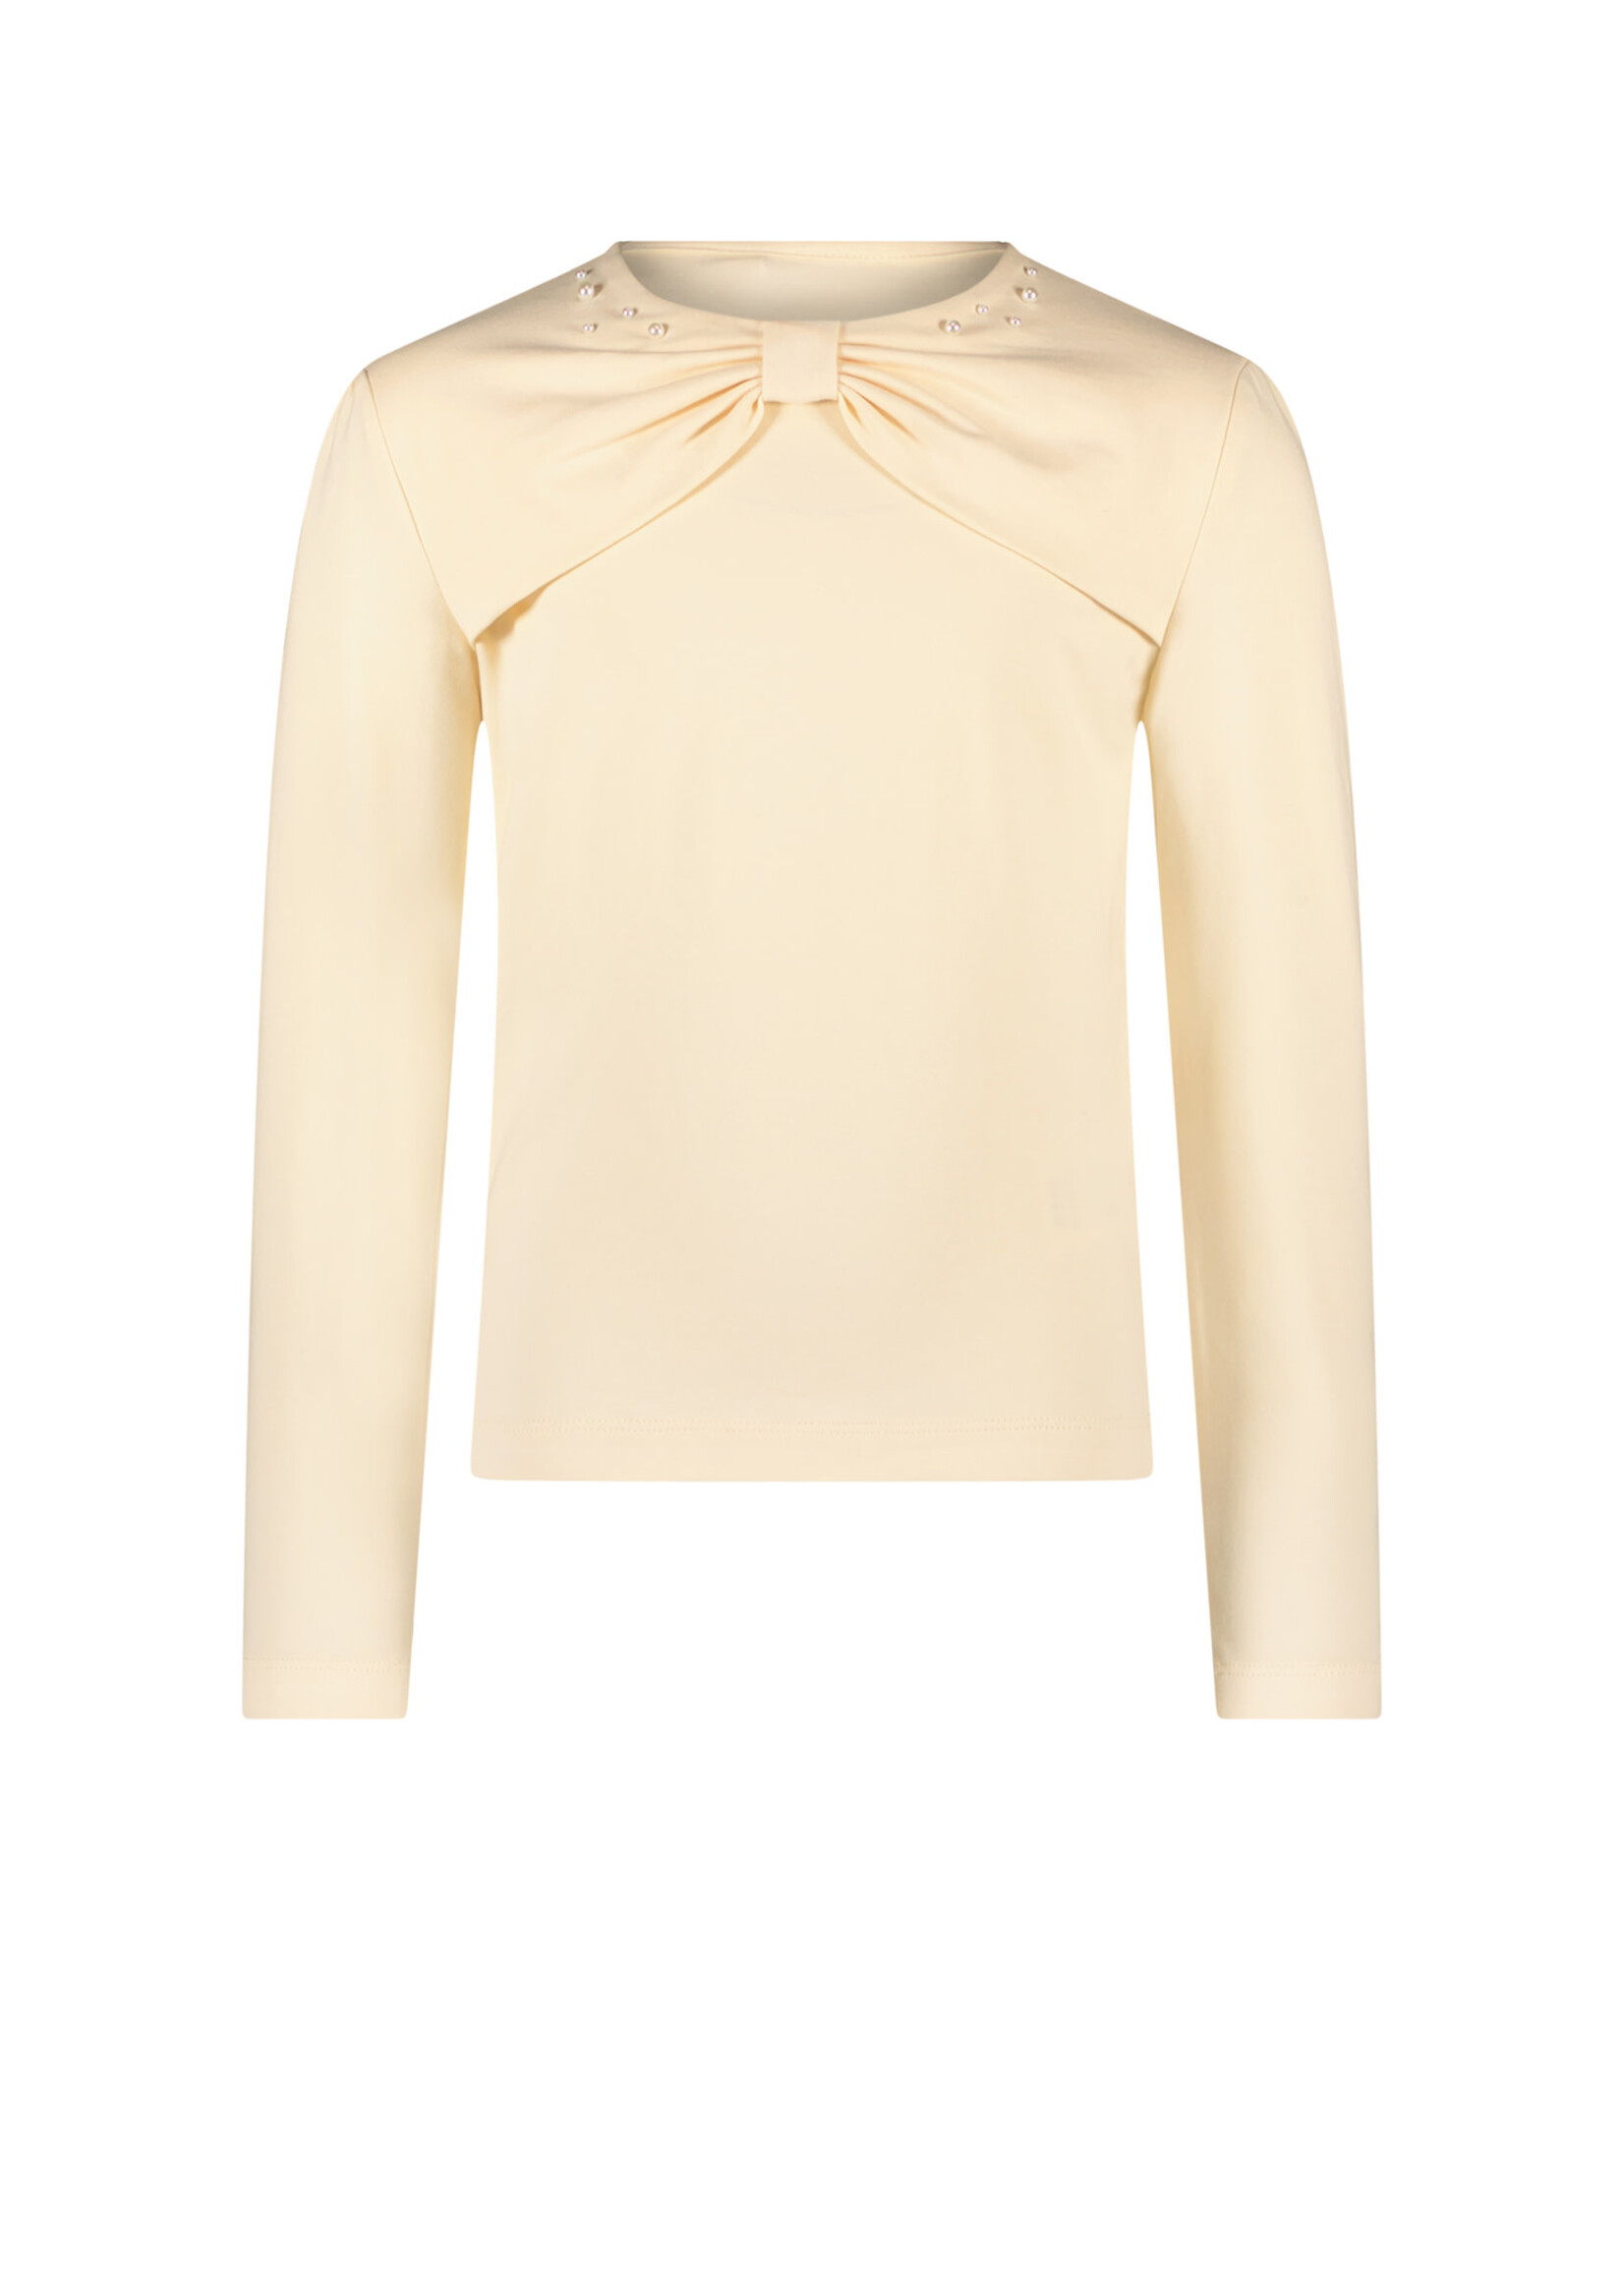 Le Chic Le Chic ELIFIMBUS bow with pearls T-shirt 008 - Pearled Ivory